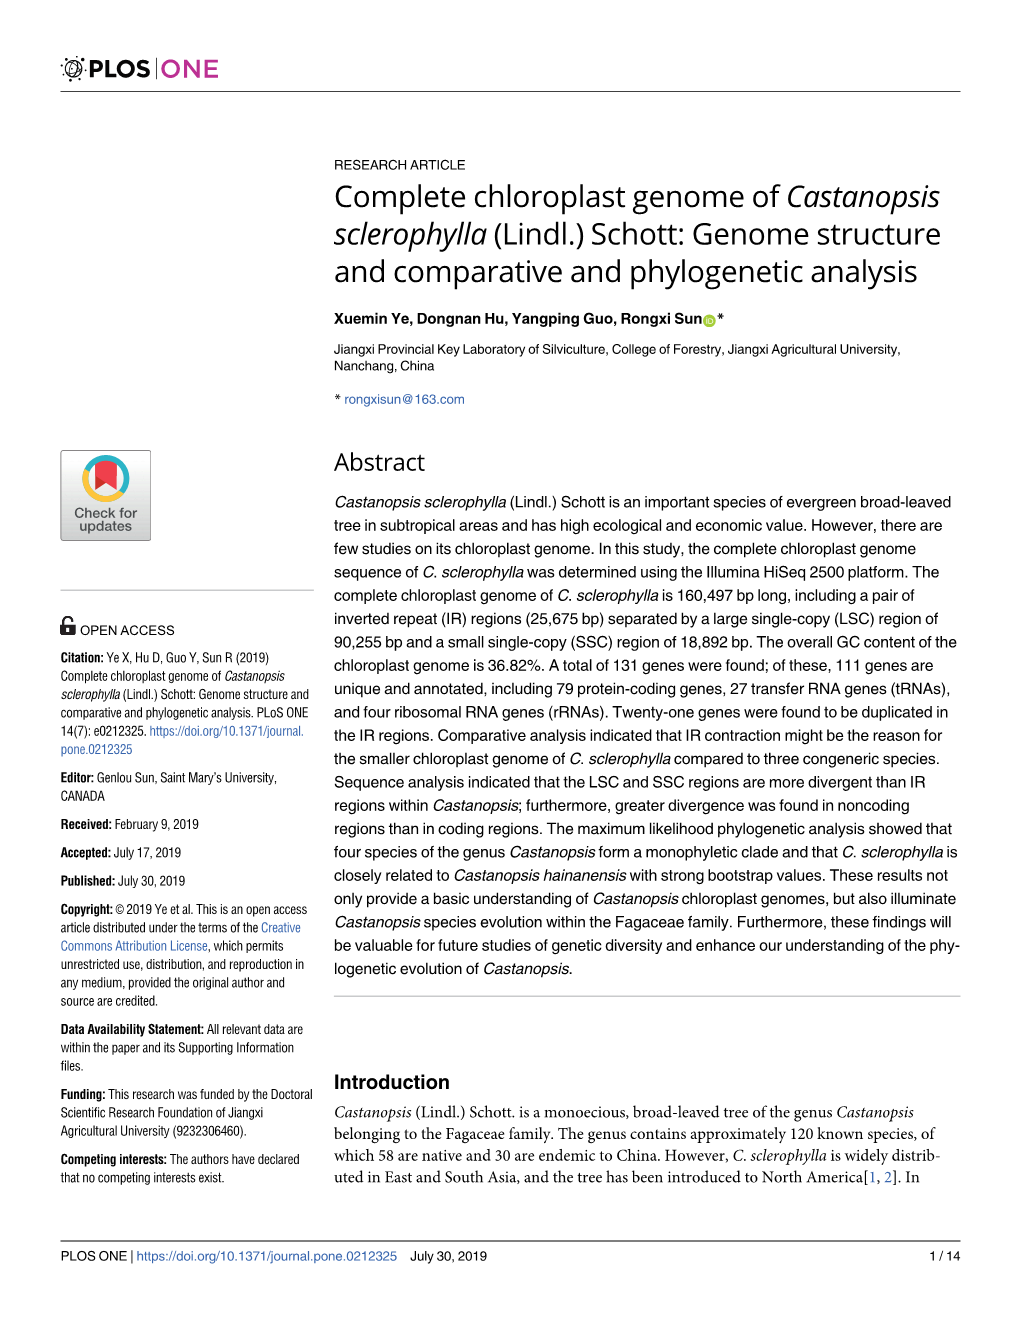 Complete Chloroplast Genome of Castanopsis Sclerophylla (Lindl.) Schott: Genome Structure and Comparative and Phylogenetic Analysis